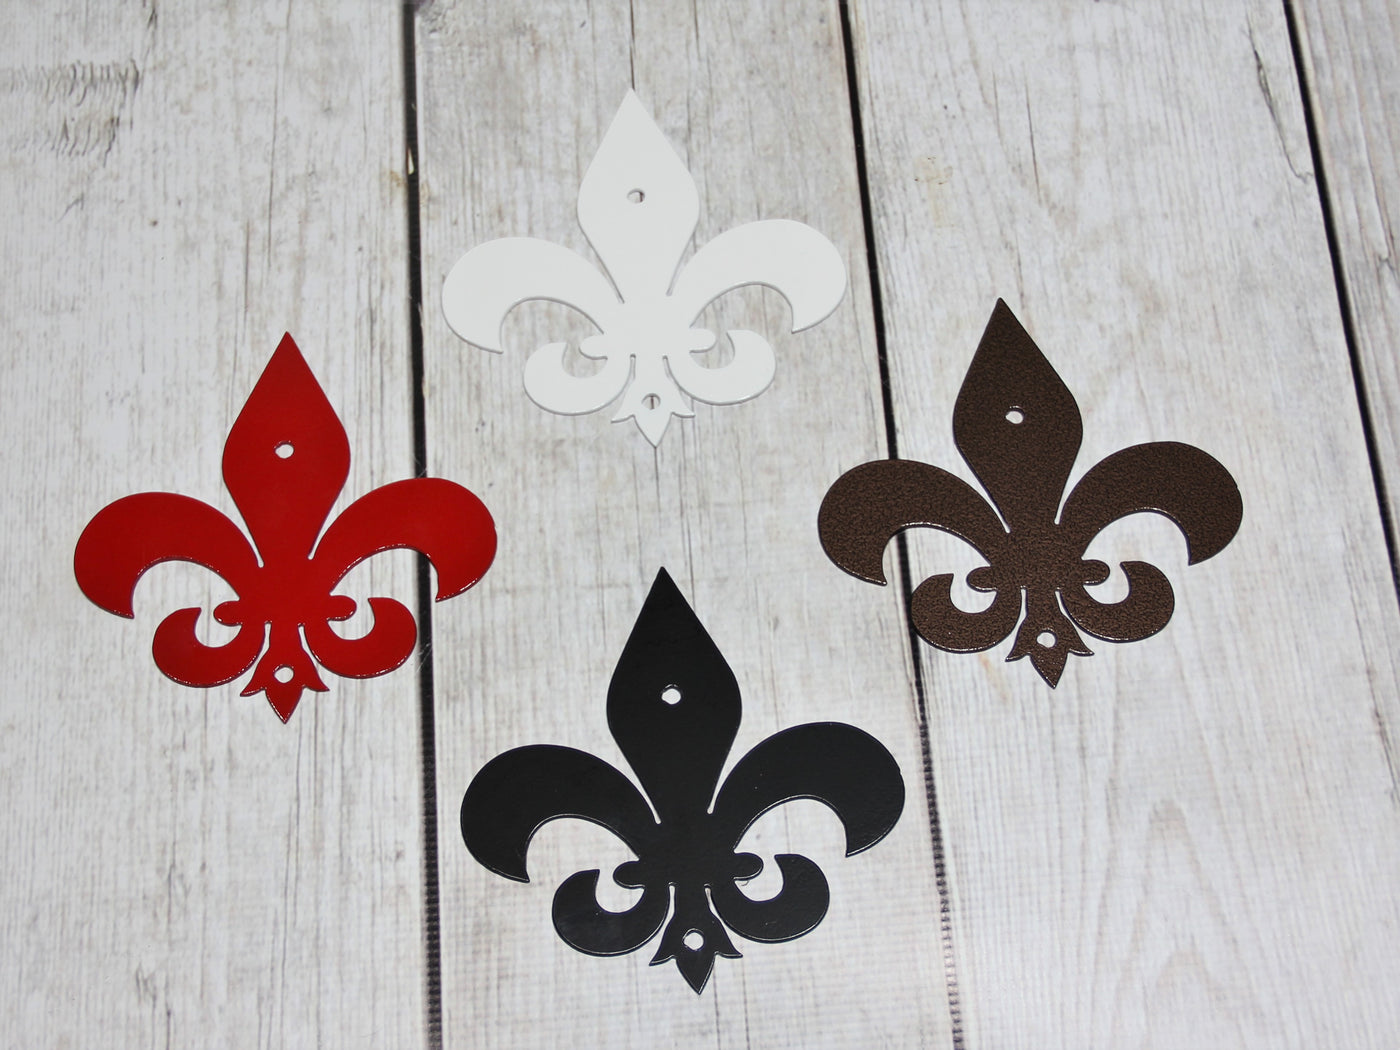 Metal Fleur De Lis, Various sizes and Colors - Madison Iron and Wood - Metal Art - metal outdoor decor - Steel deocrations - american made products - veteran owned business products - fencing decorations - fencing supplies - custom wall decorations - personalized wall signs - steel - decorative post caps - steel post caps - metal post caps - brackets - structural brackets - home improvement - easter - easter decorations - easter gift - easter yard decor